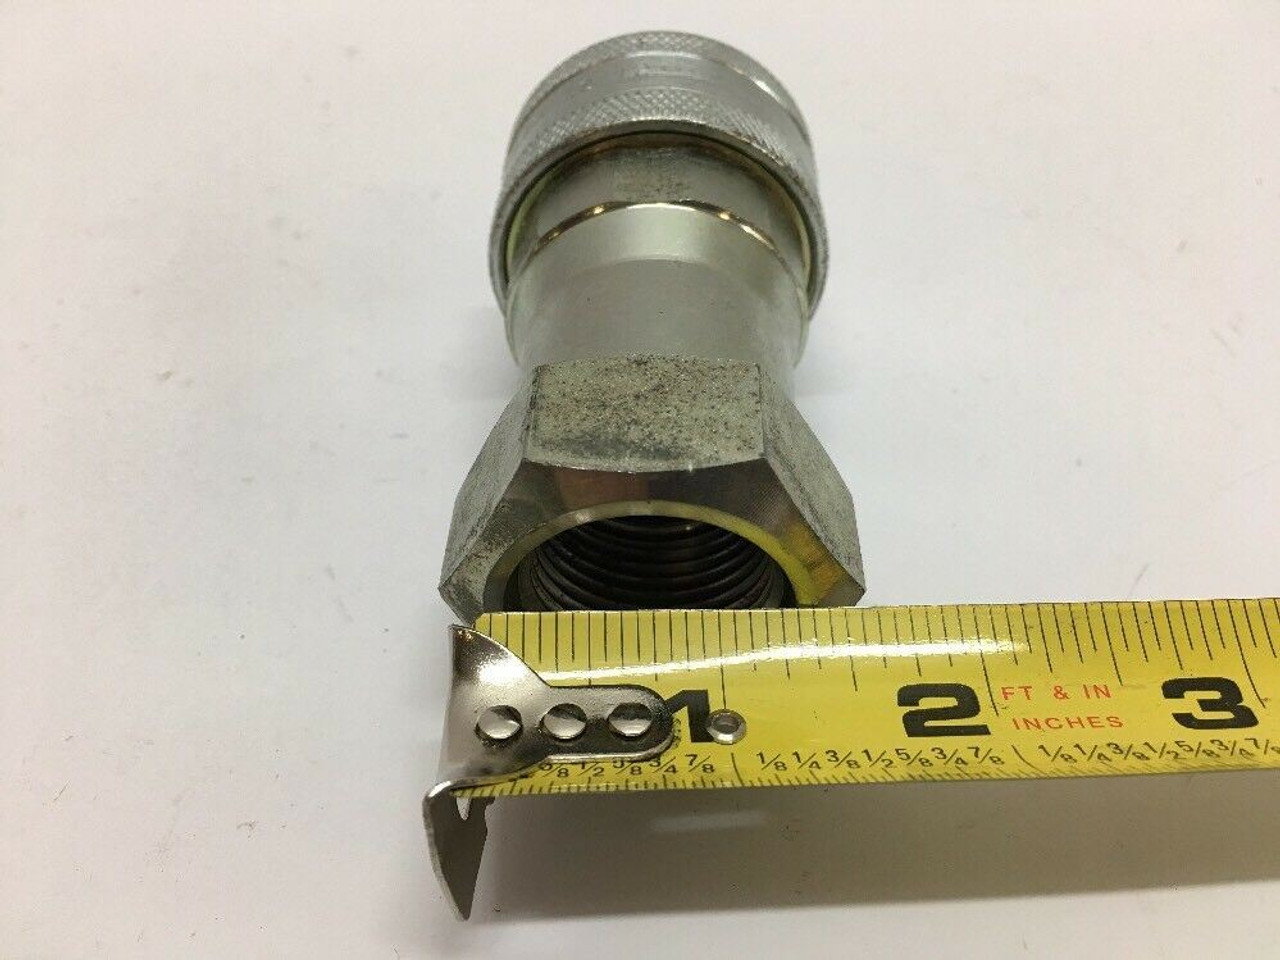 Quick Disconnect Coupling Half 10503865 General Dynamics Steel